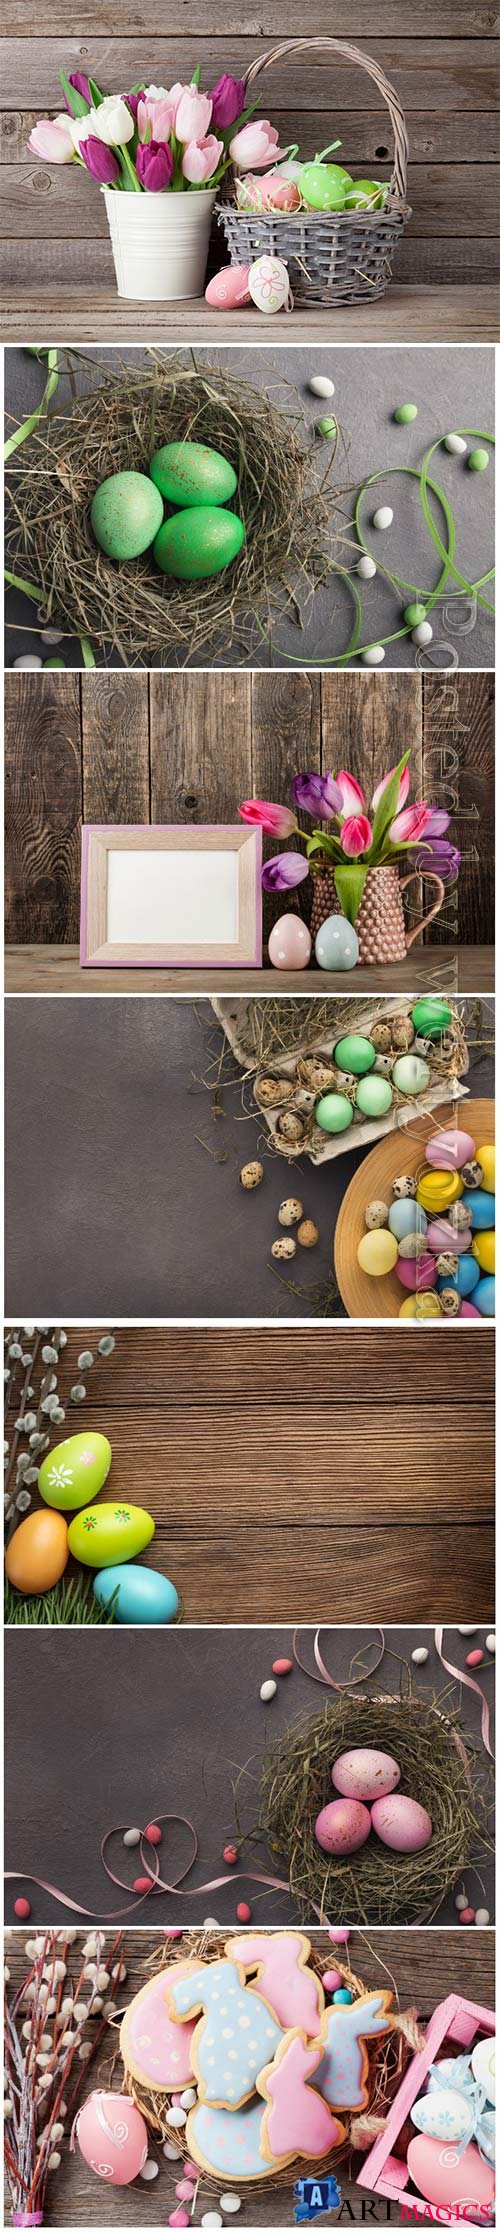 Happy Easter stock photo, Easter eggs, spring flowers # 4